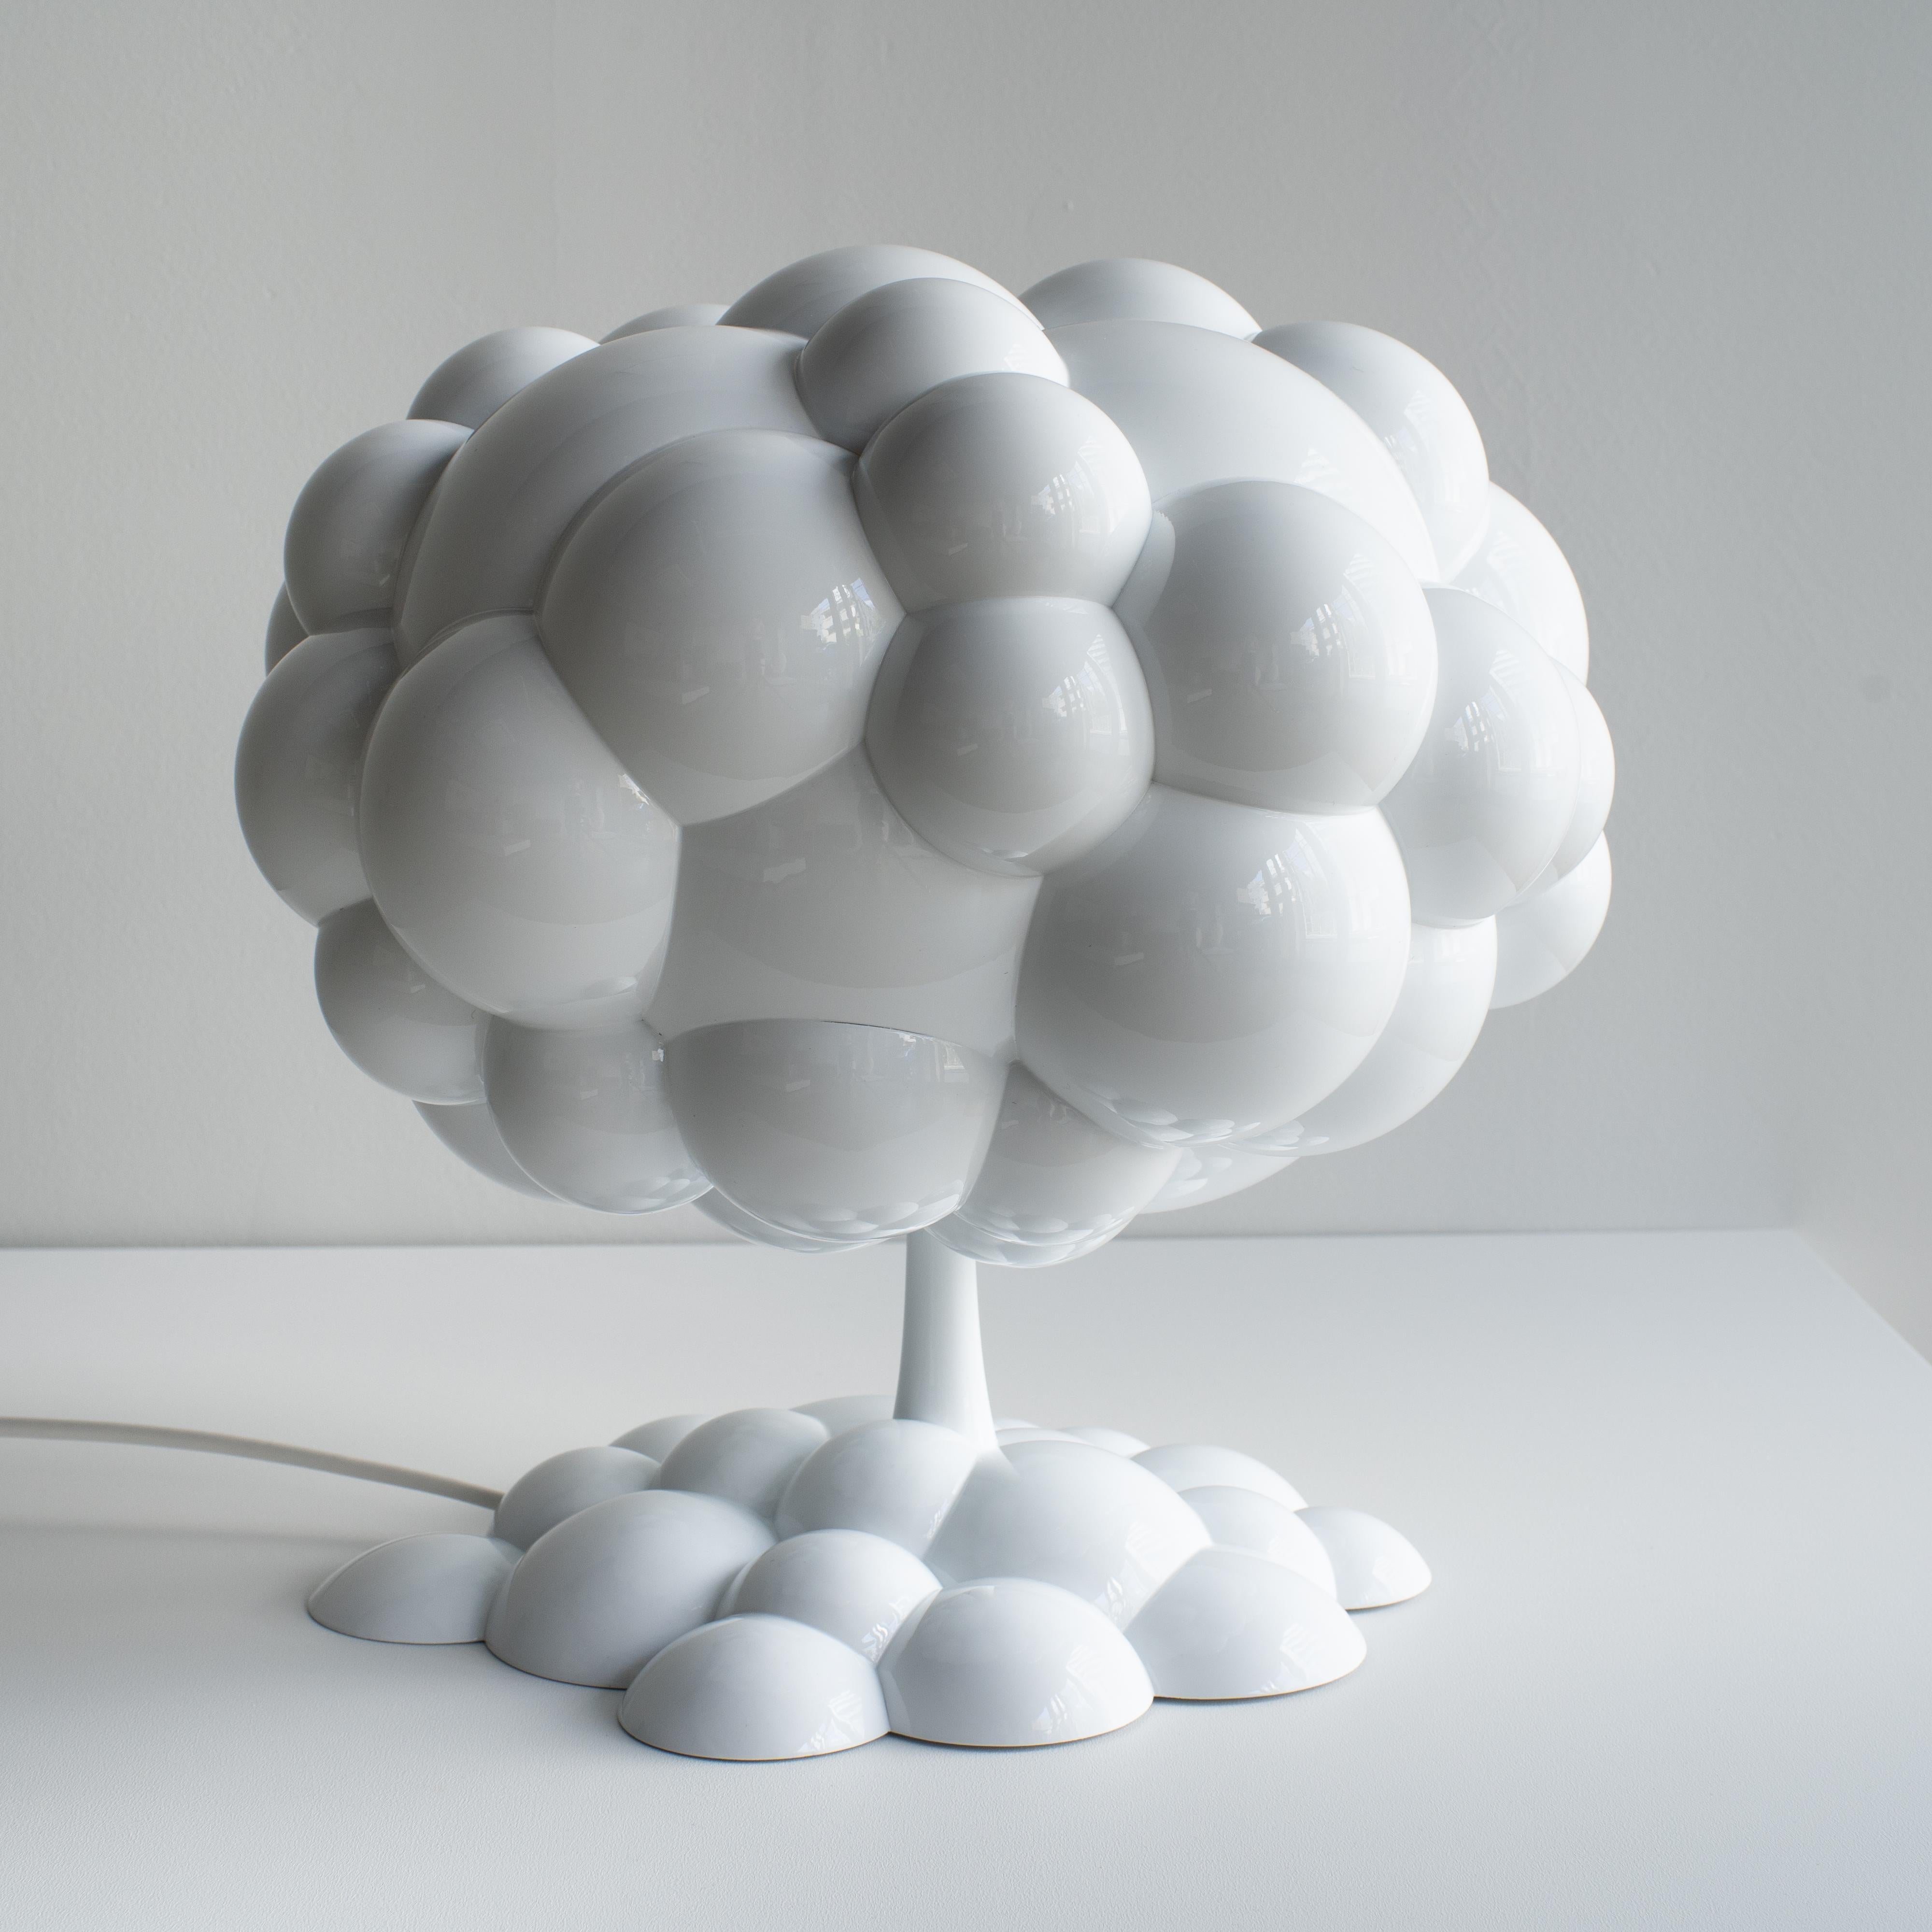 Mushroom lamp designed by h220430, Satoshi Itasaka. 
This work's theme is nuclear. We human being treats this difficult materials for electric energy or weapon. This woks tell us such dangerous technology is here behind our world.
One of the